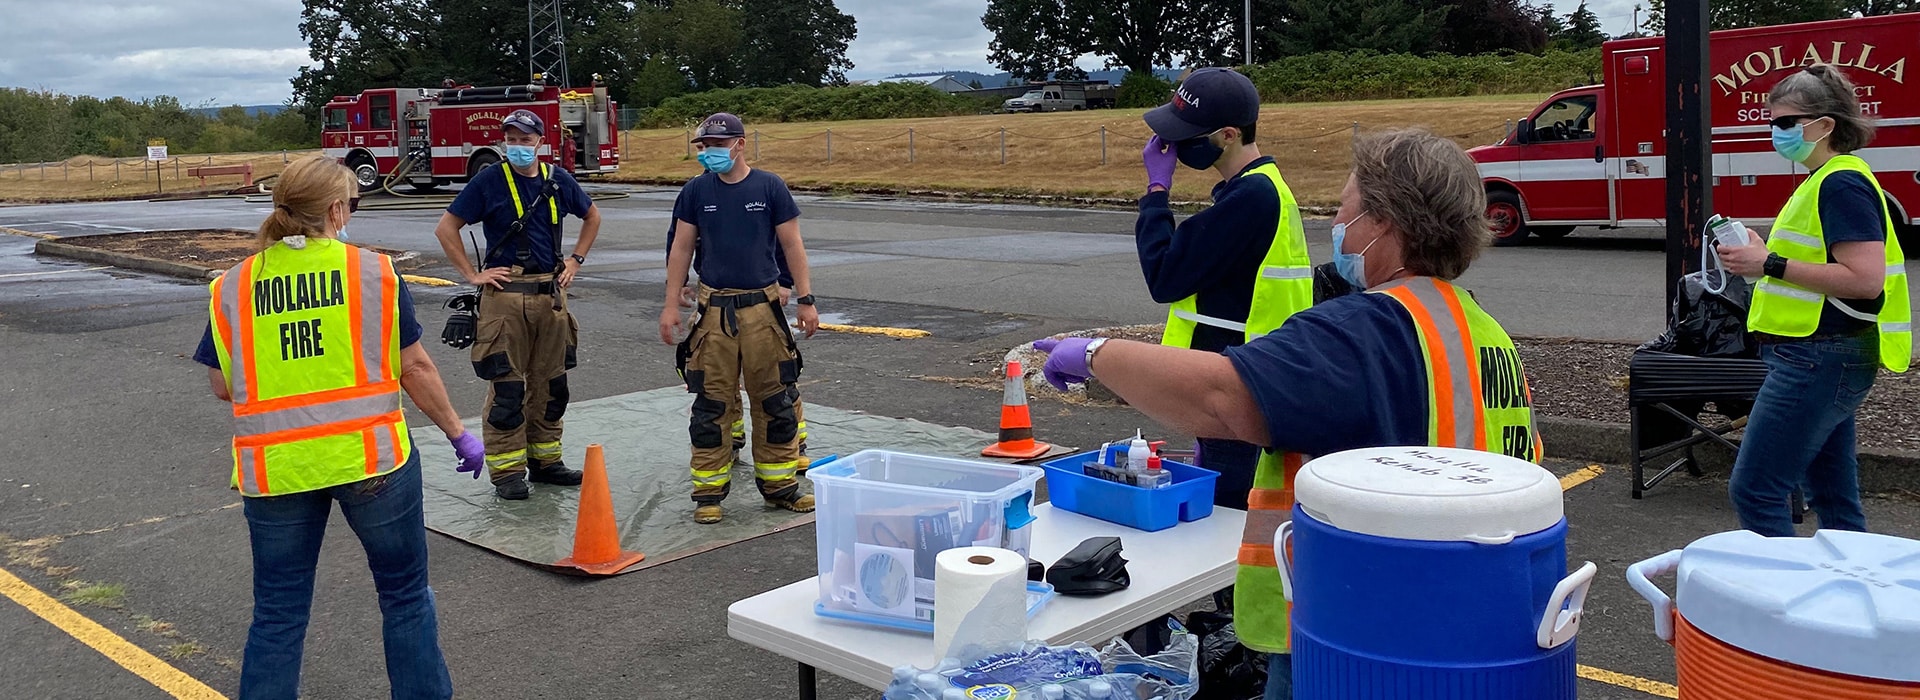 Molalla support volunteers assisting with decontamination training